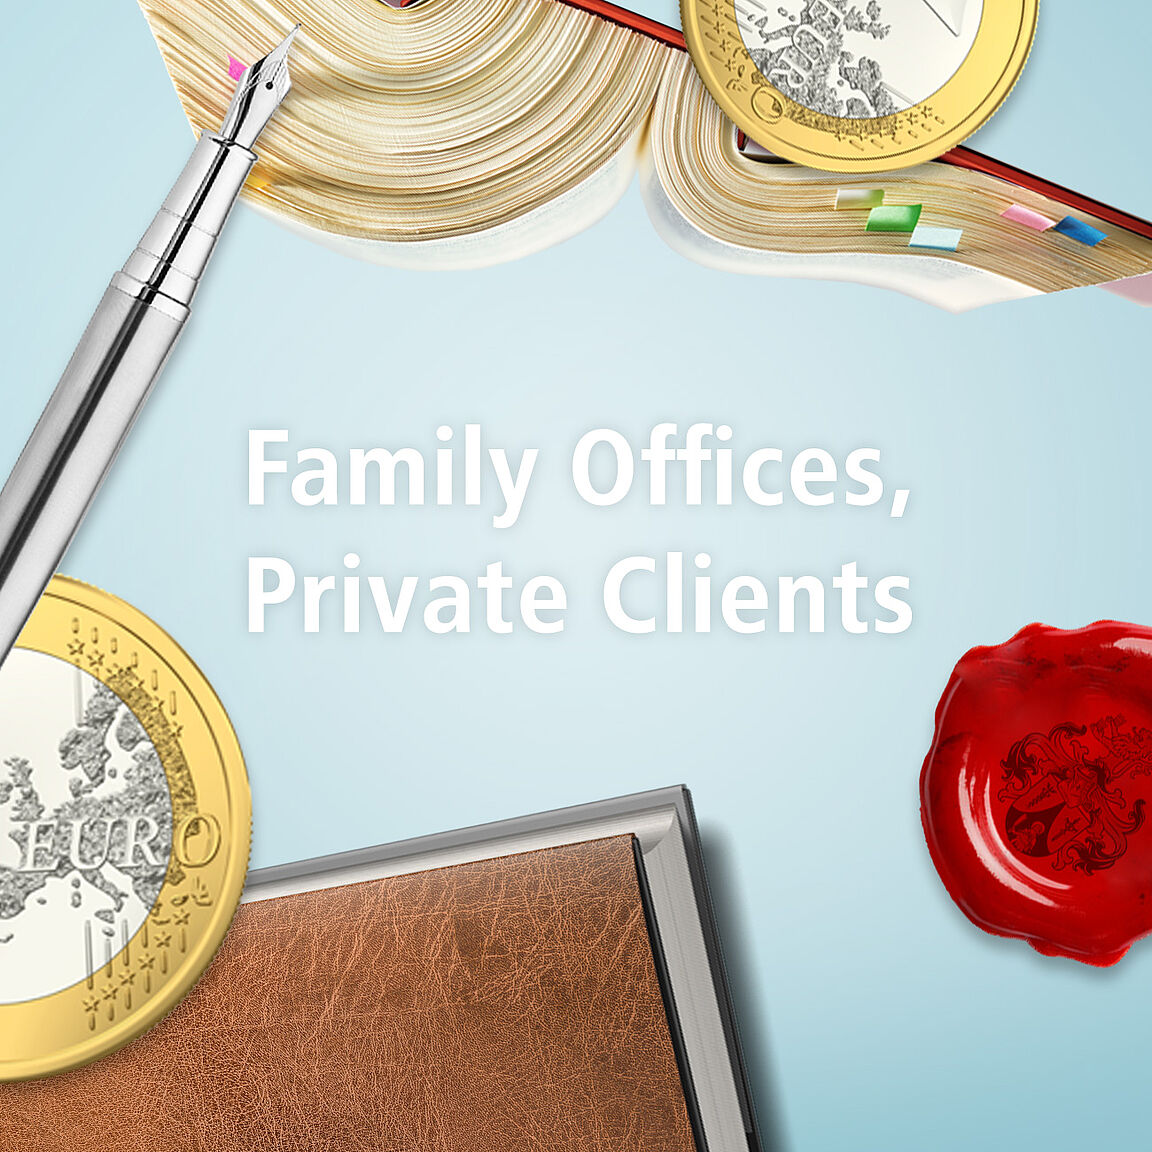 [Translate to French:] private clients, family offices